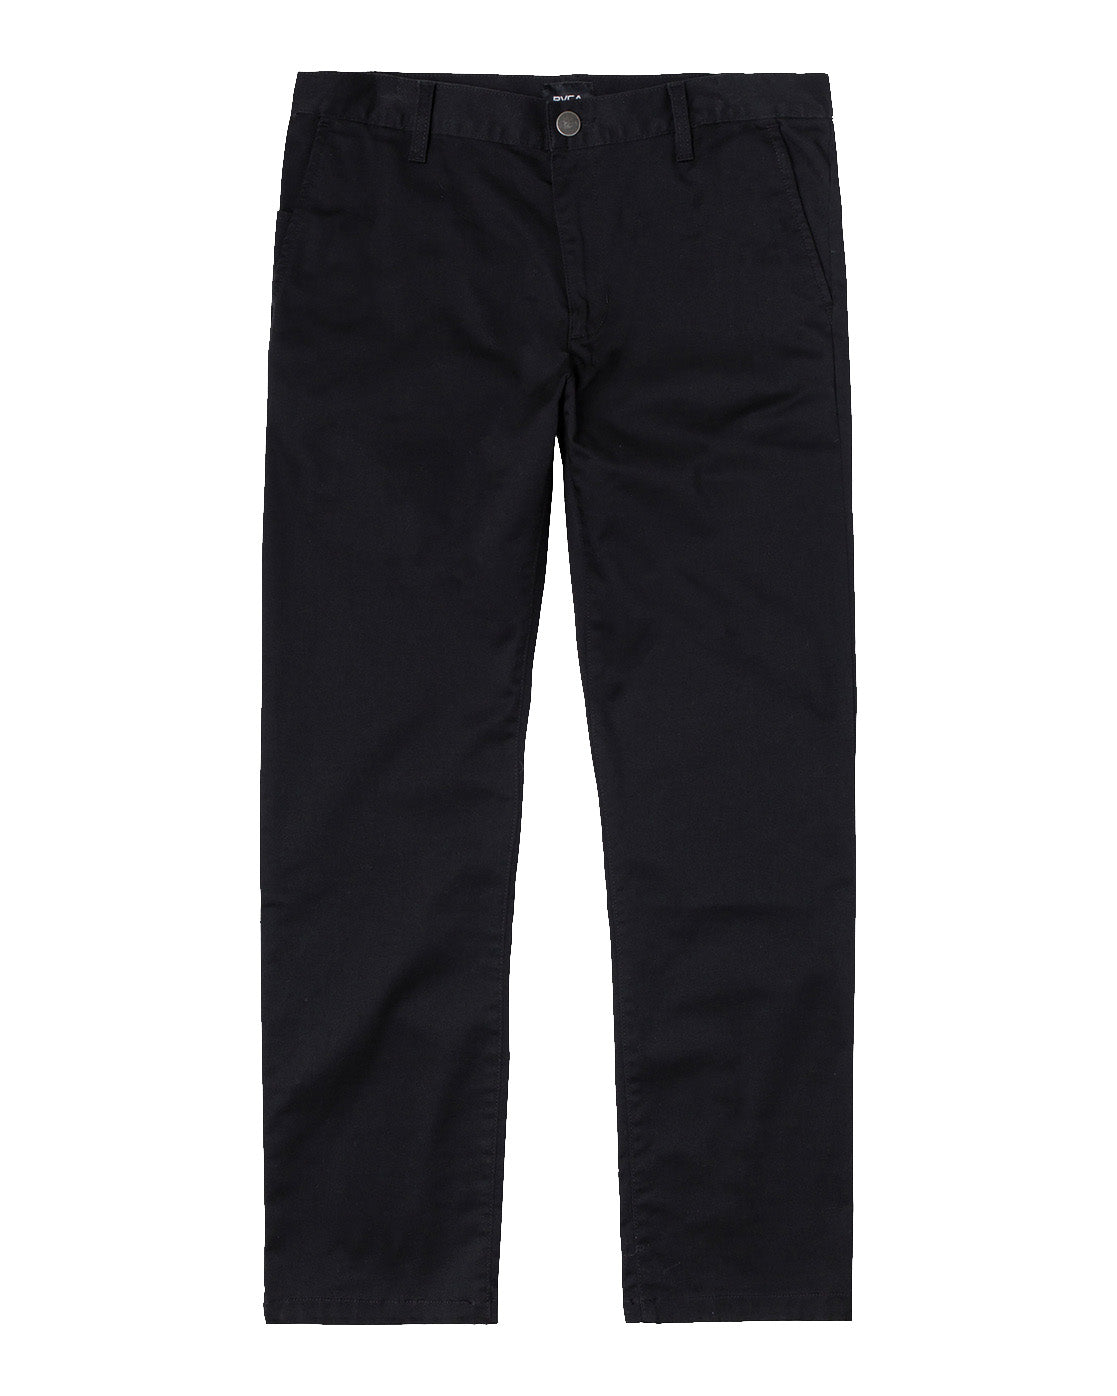 RVCA The Weekend Stretch Pant BLK 36